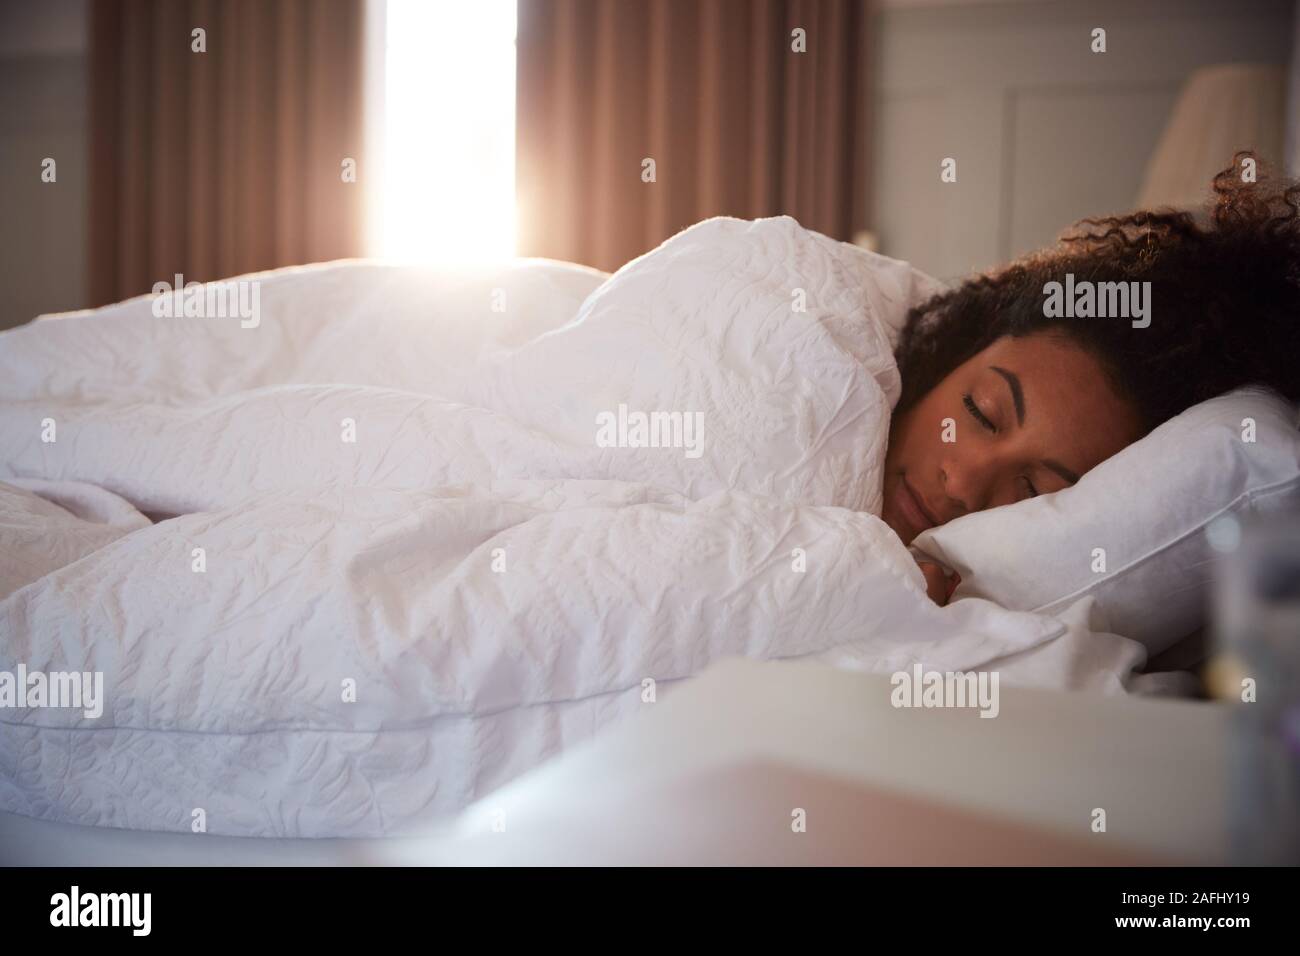 Peaceful Woman Asleep In Bed As Day Break Through Curtains Stock Photo